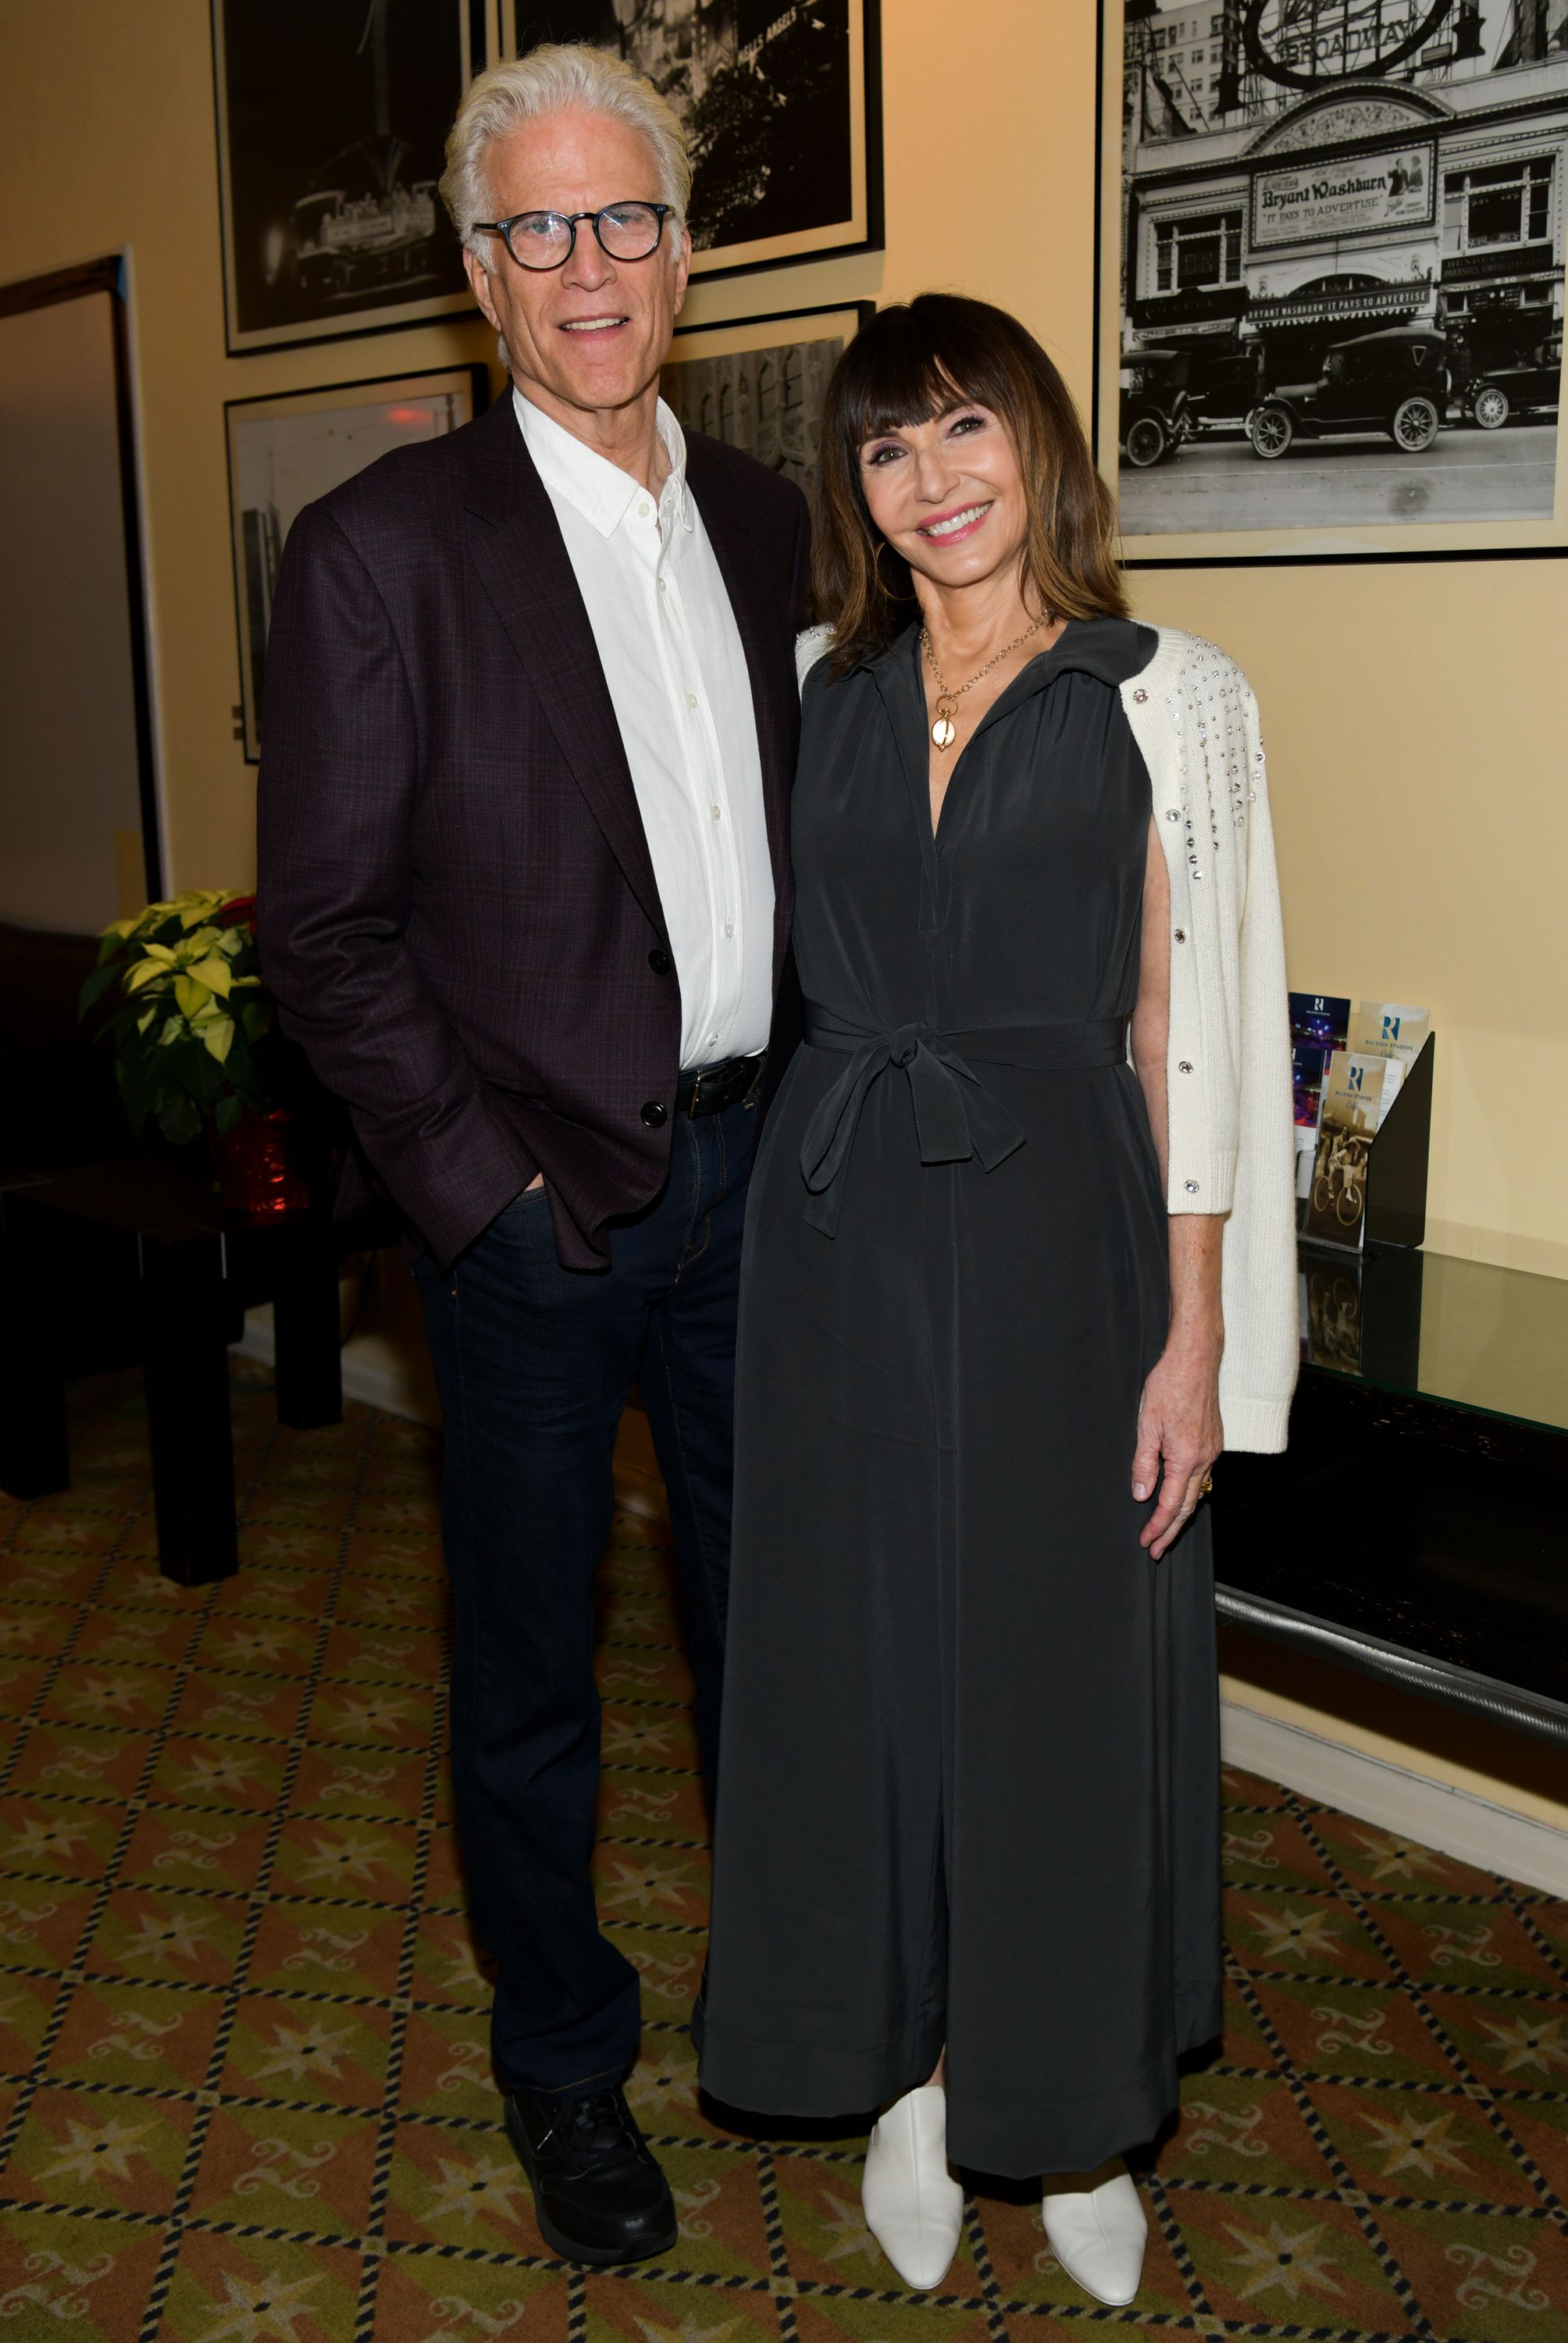 Ted Danson (L) and Mary Steenburgen at a special screening of "Wild Rose" at Raleigh Studios on December 06, 2019 | Getty Images 